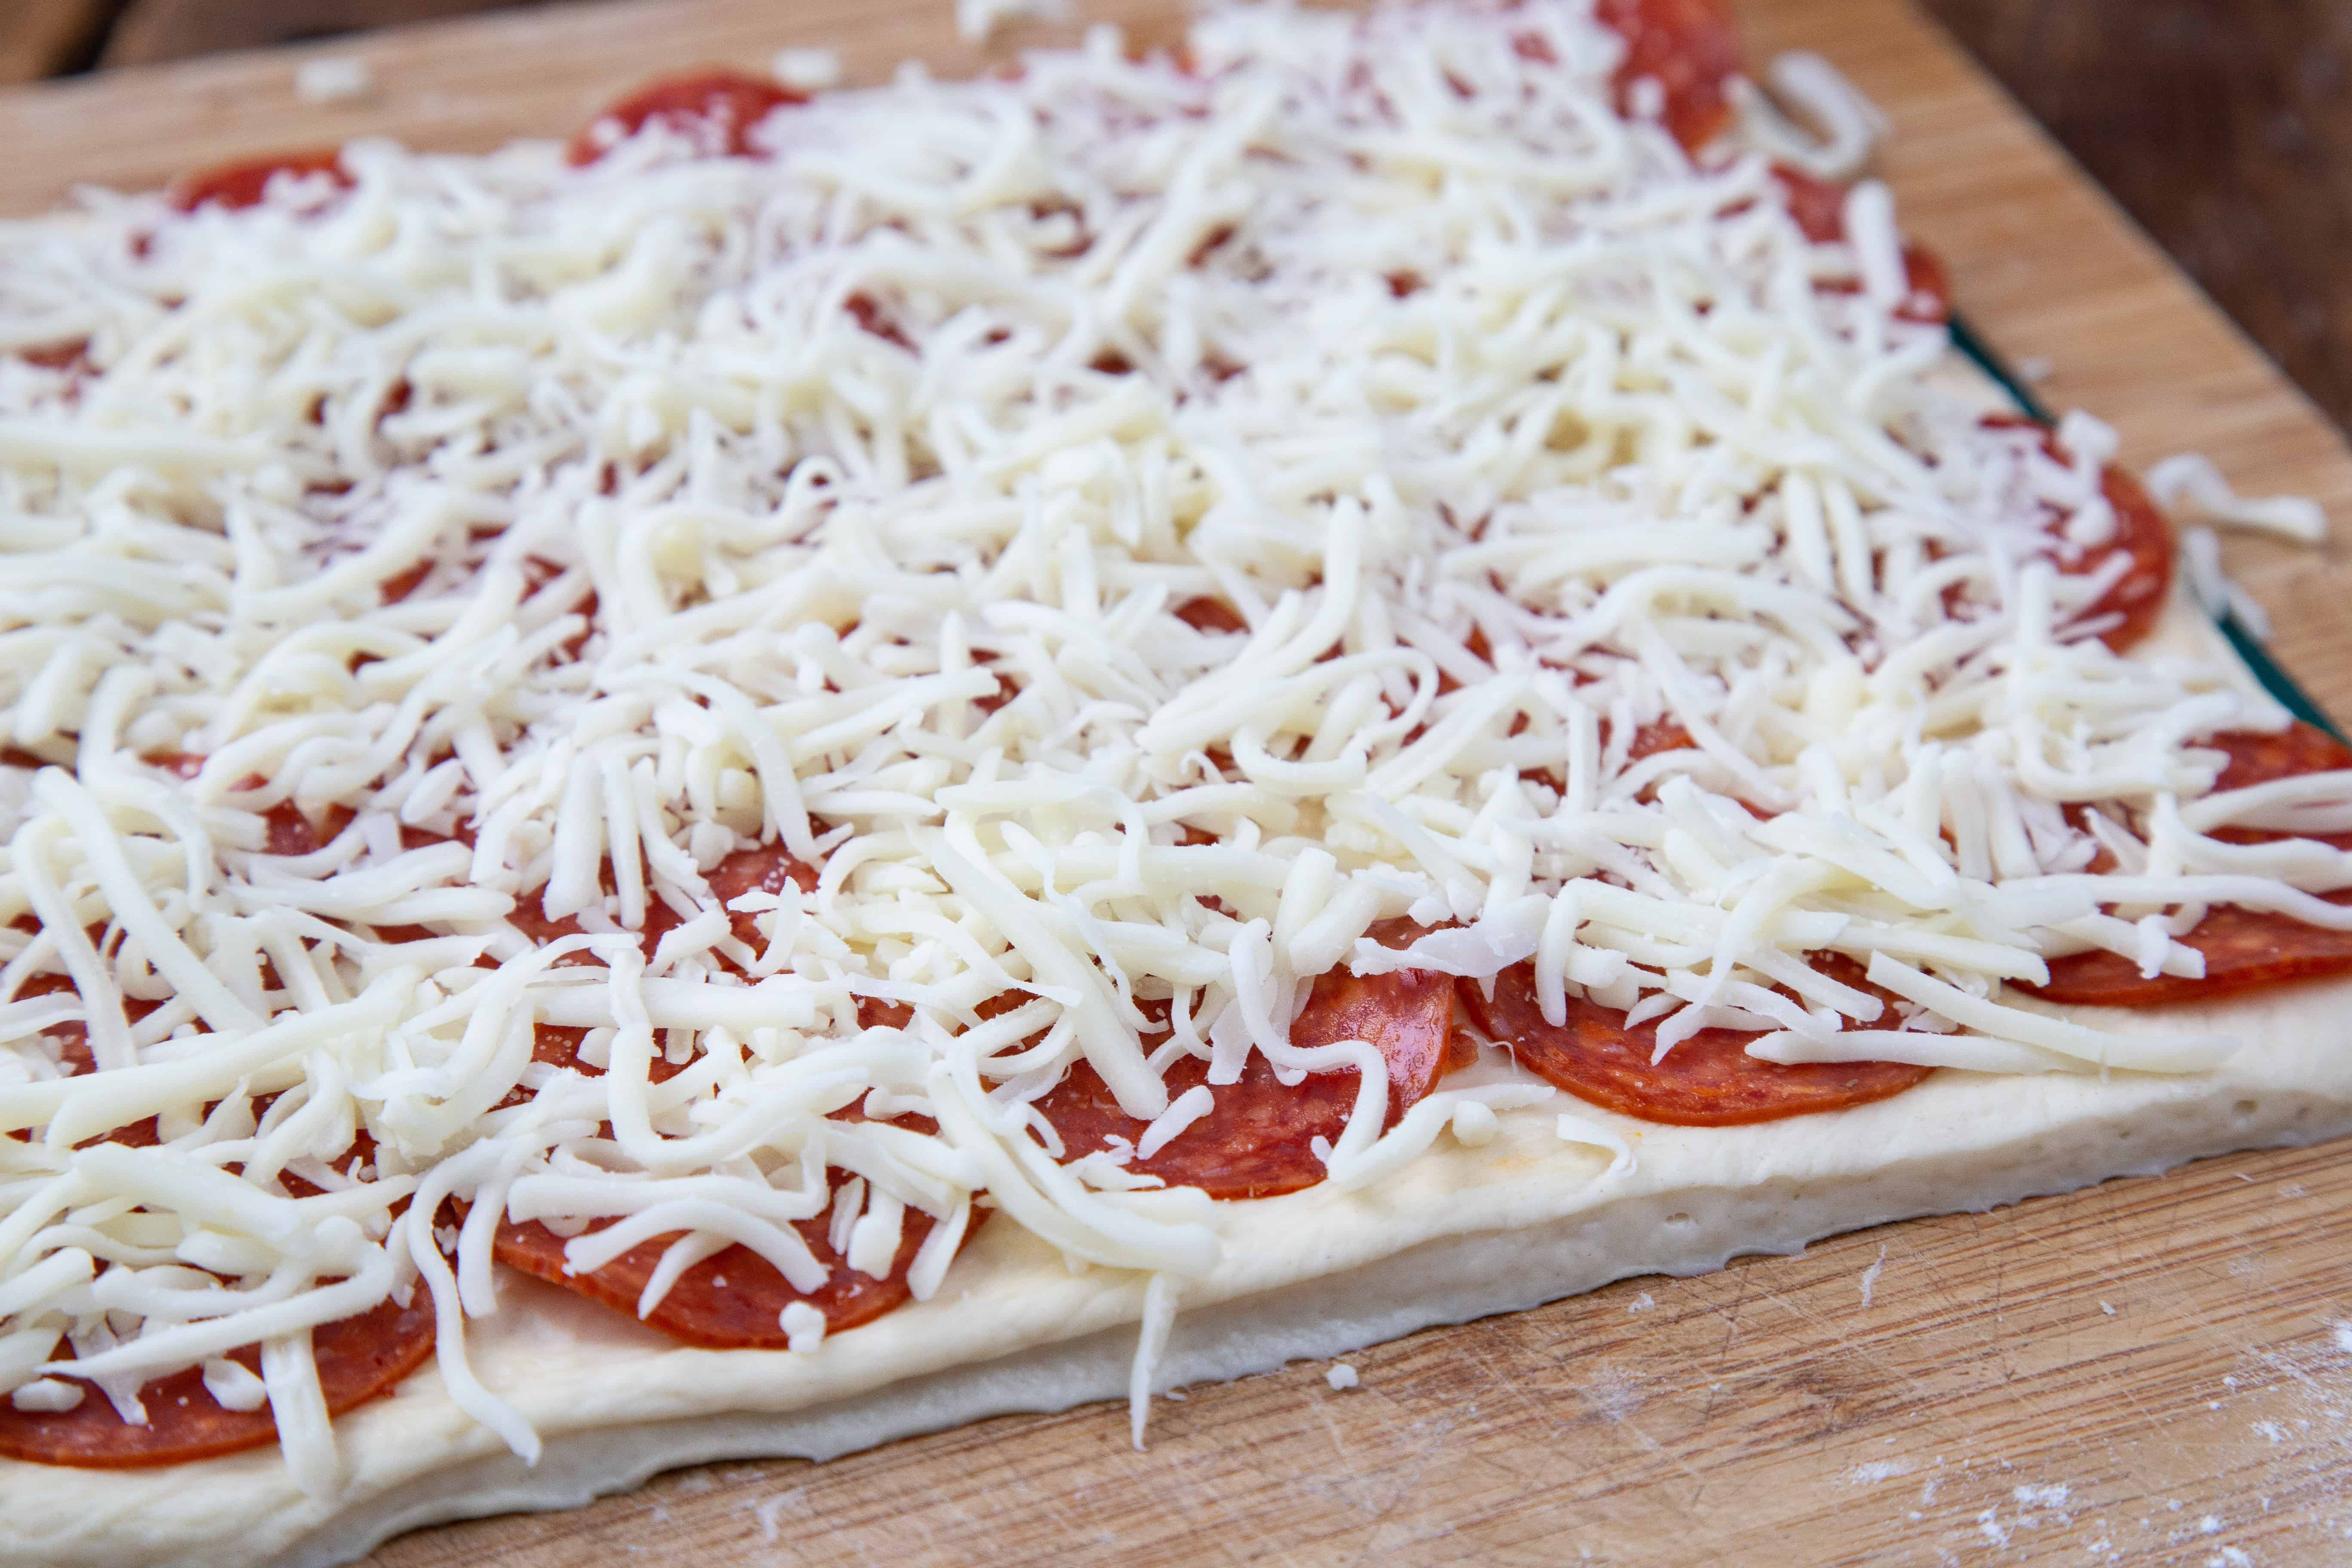 rectangle of pizza dough with pepperoni and cheese on top.